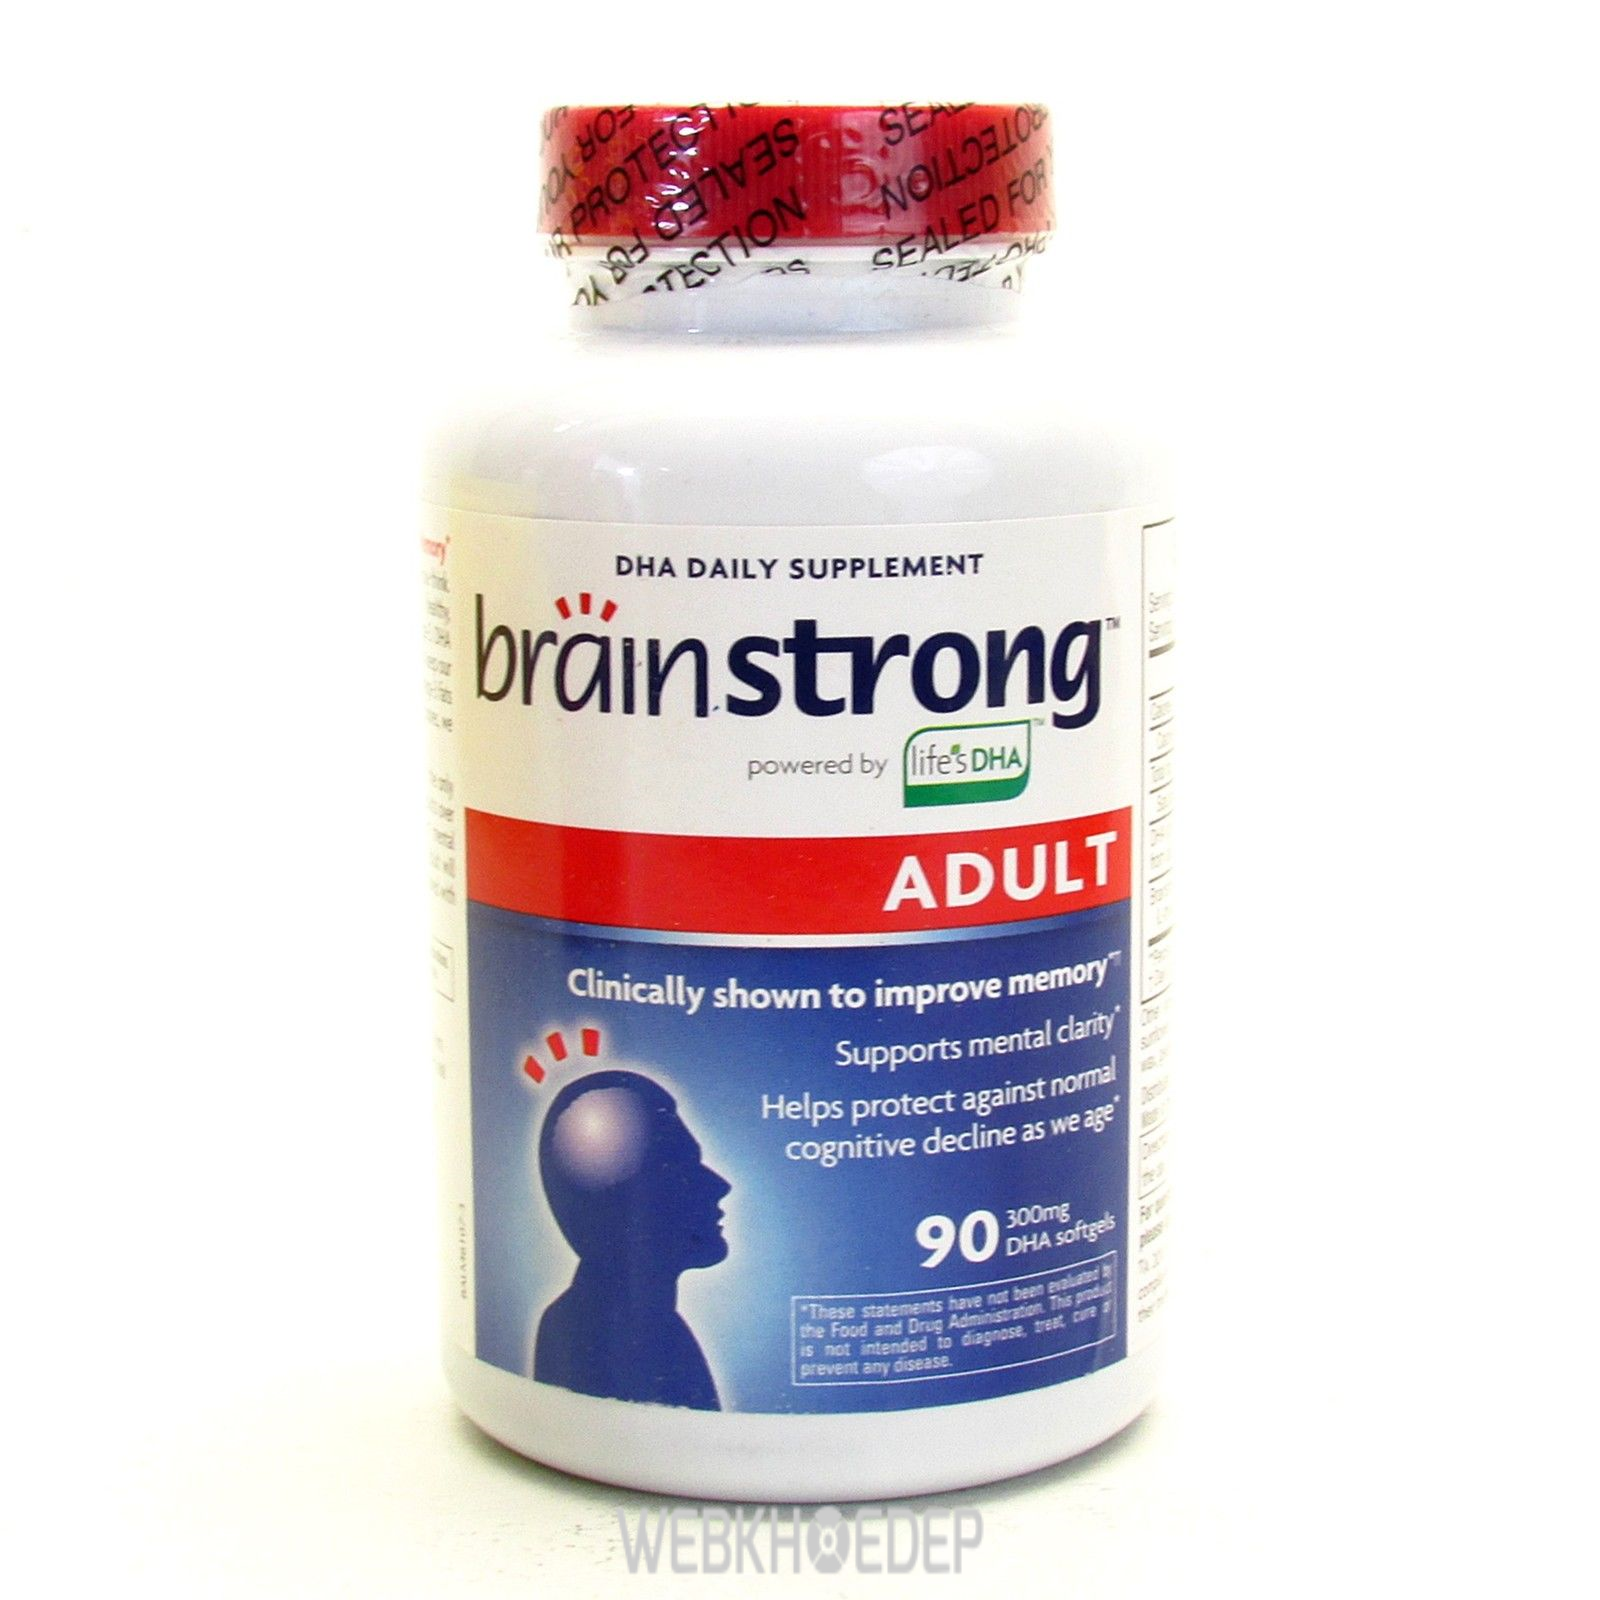 BrainStrong Adult DHA